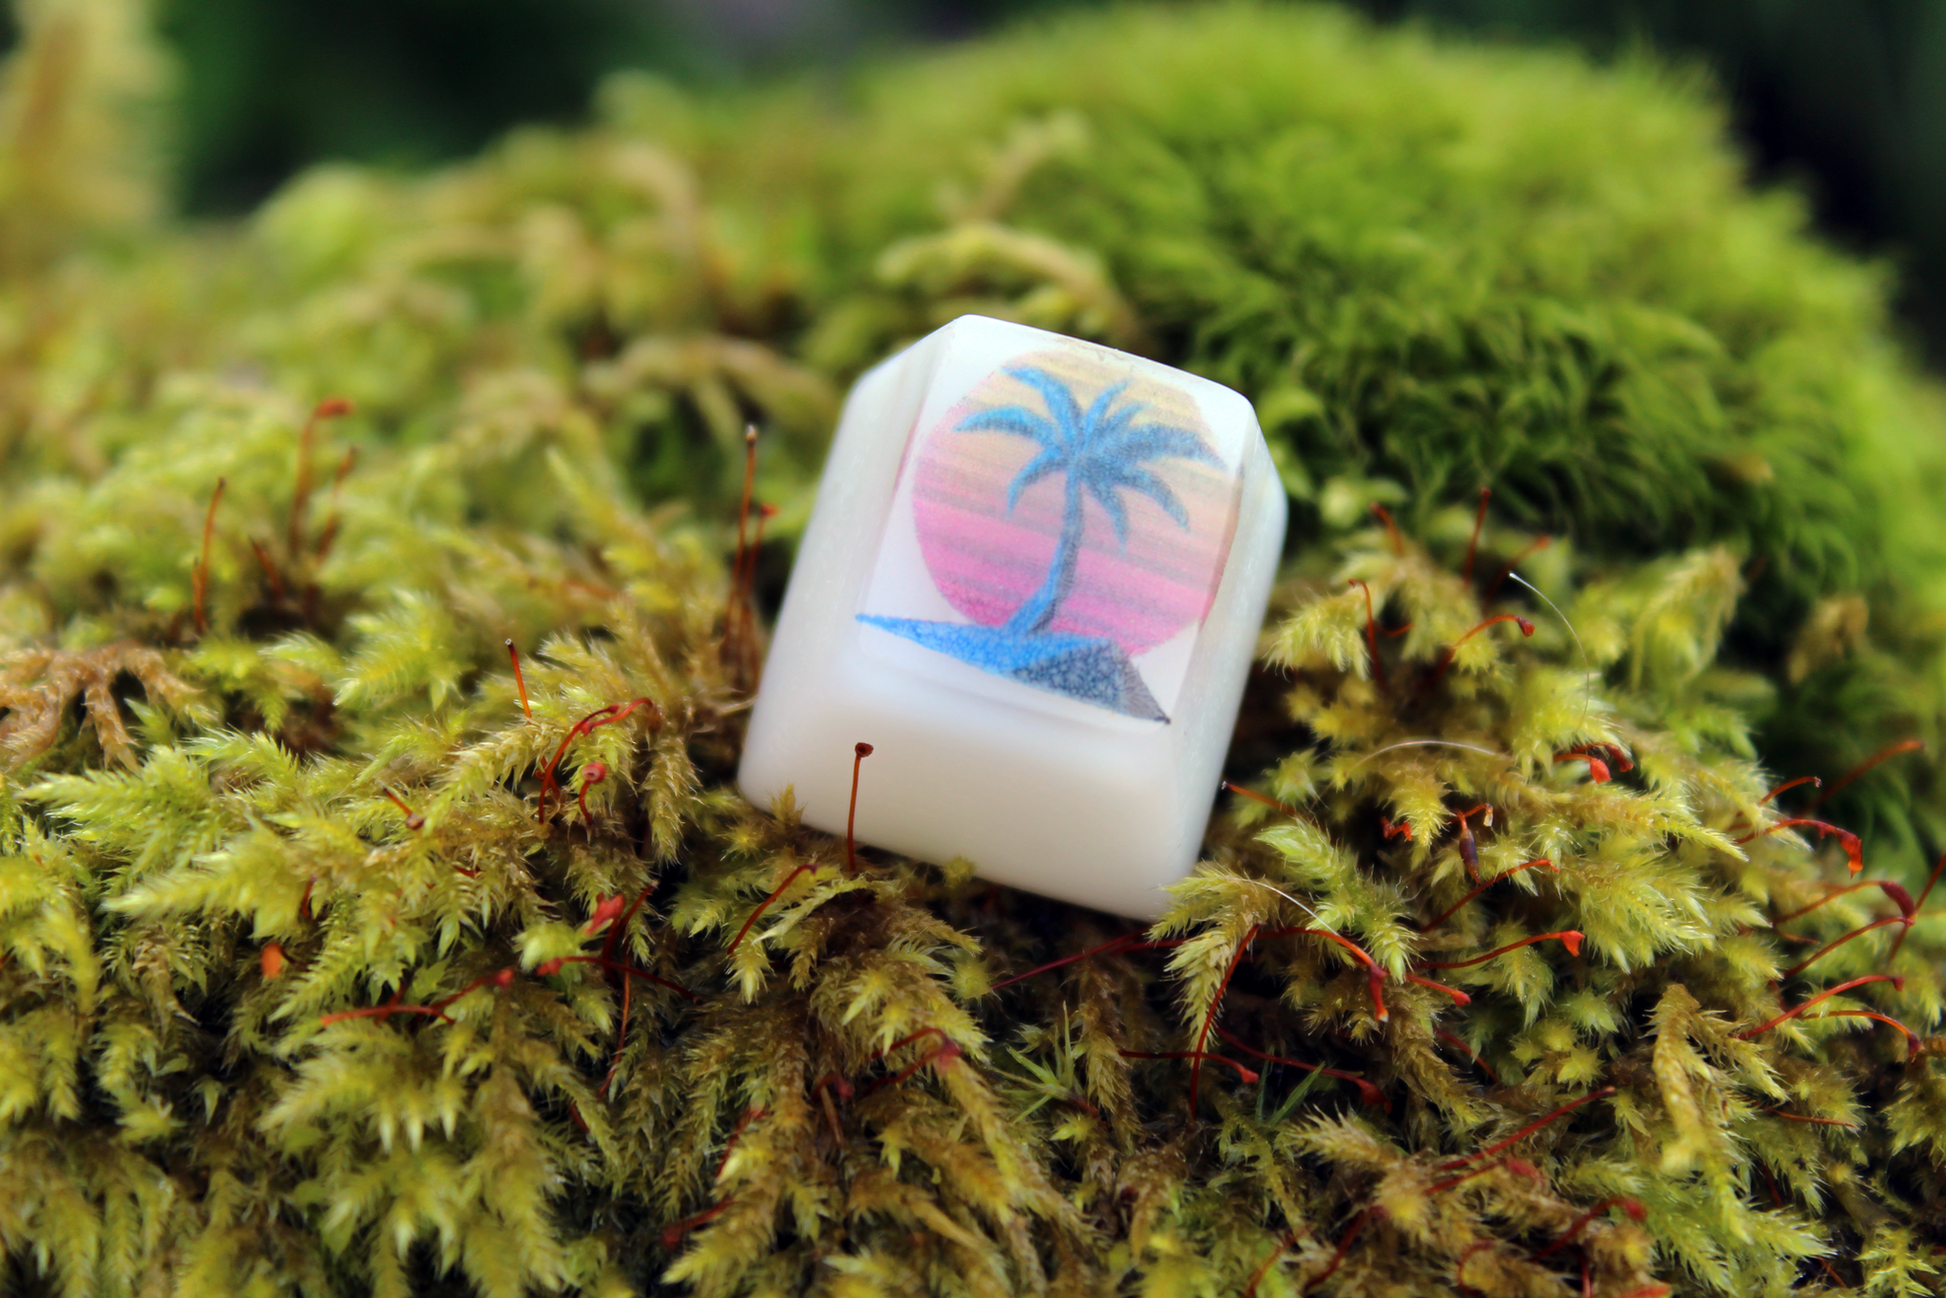 Chaos Caps 1.1 - 1984 Palm - PrimeCaps Keycap - Blank and Sculpted Artisan Keycaps for cherry MX mechanical keyboards 